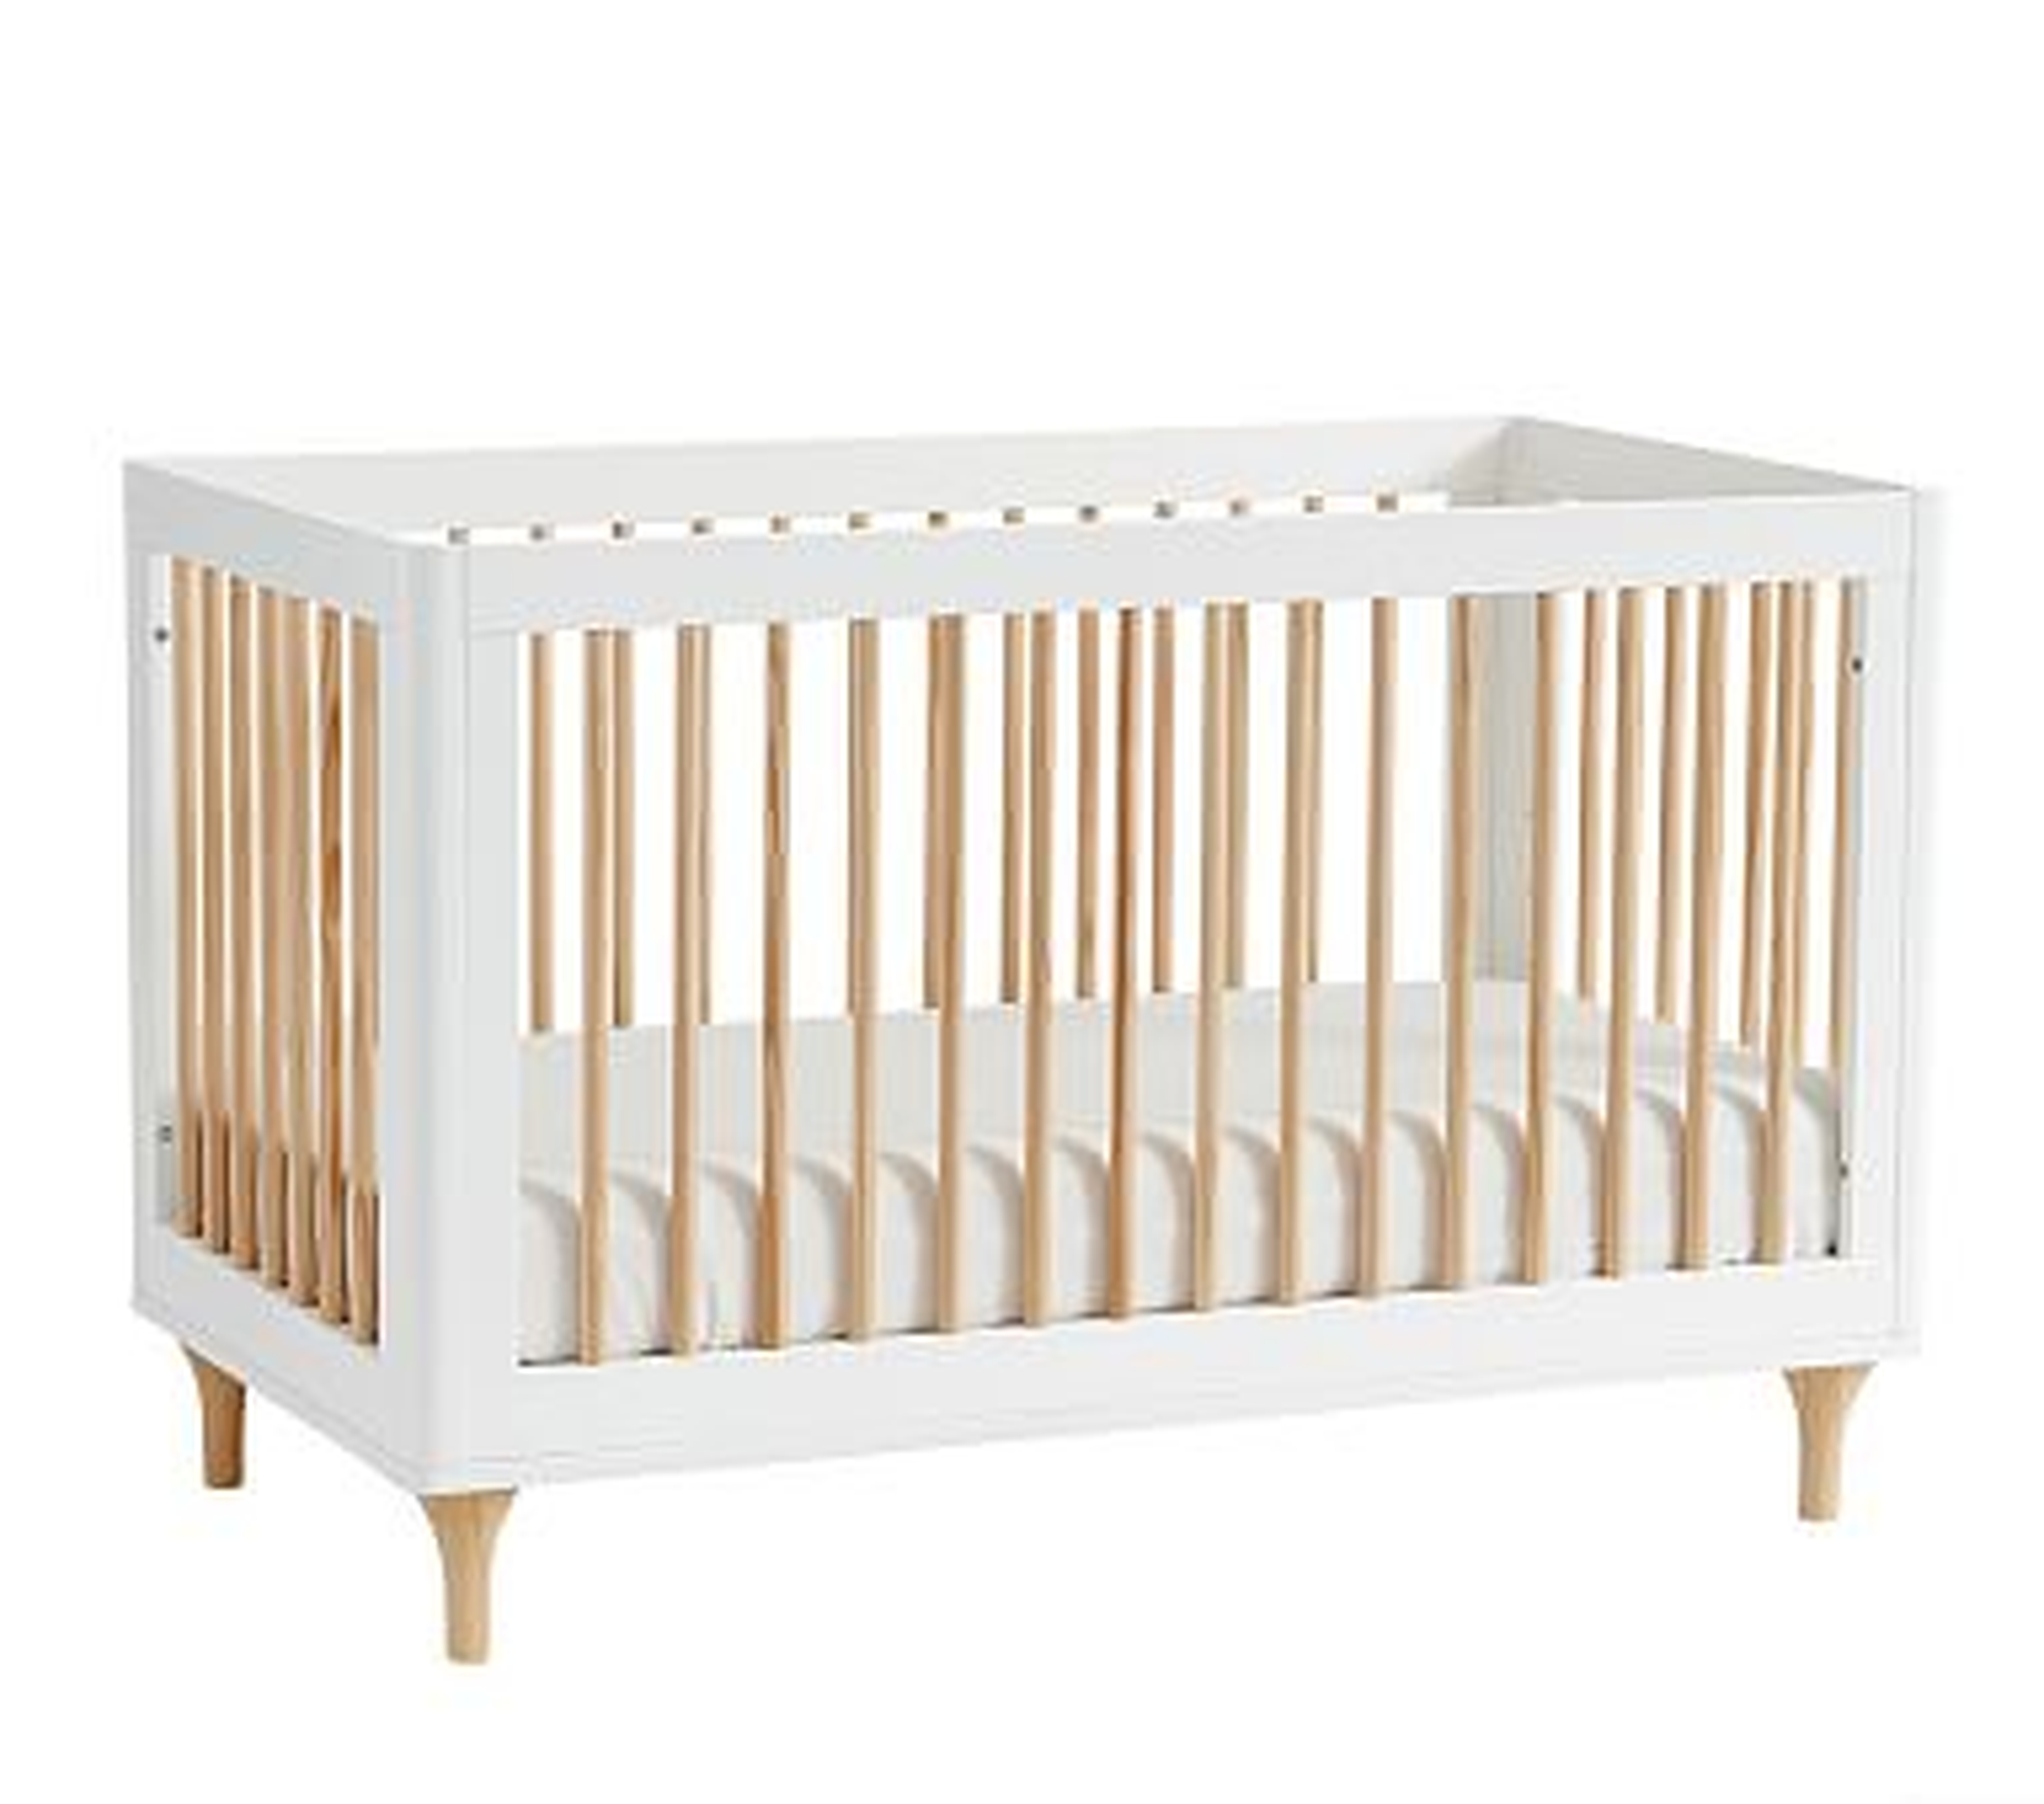 Babyletto Lolly 3-In-1 Convertible Crib, White/Natural, Standard UPS Delivery - Pottery Barn Kids